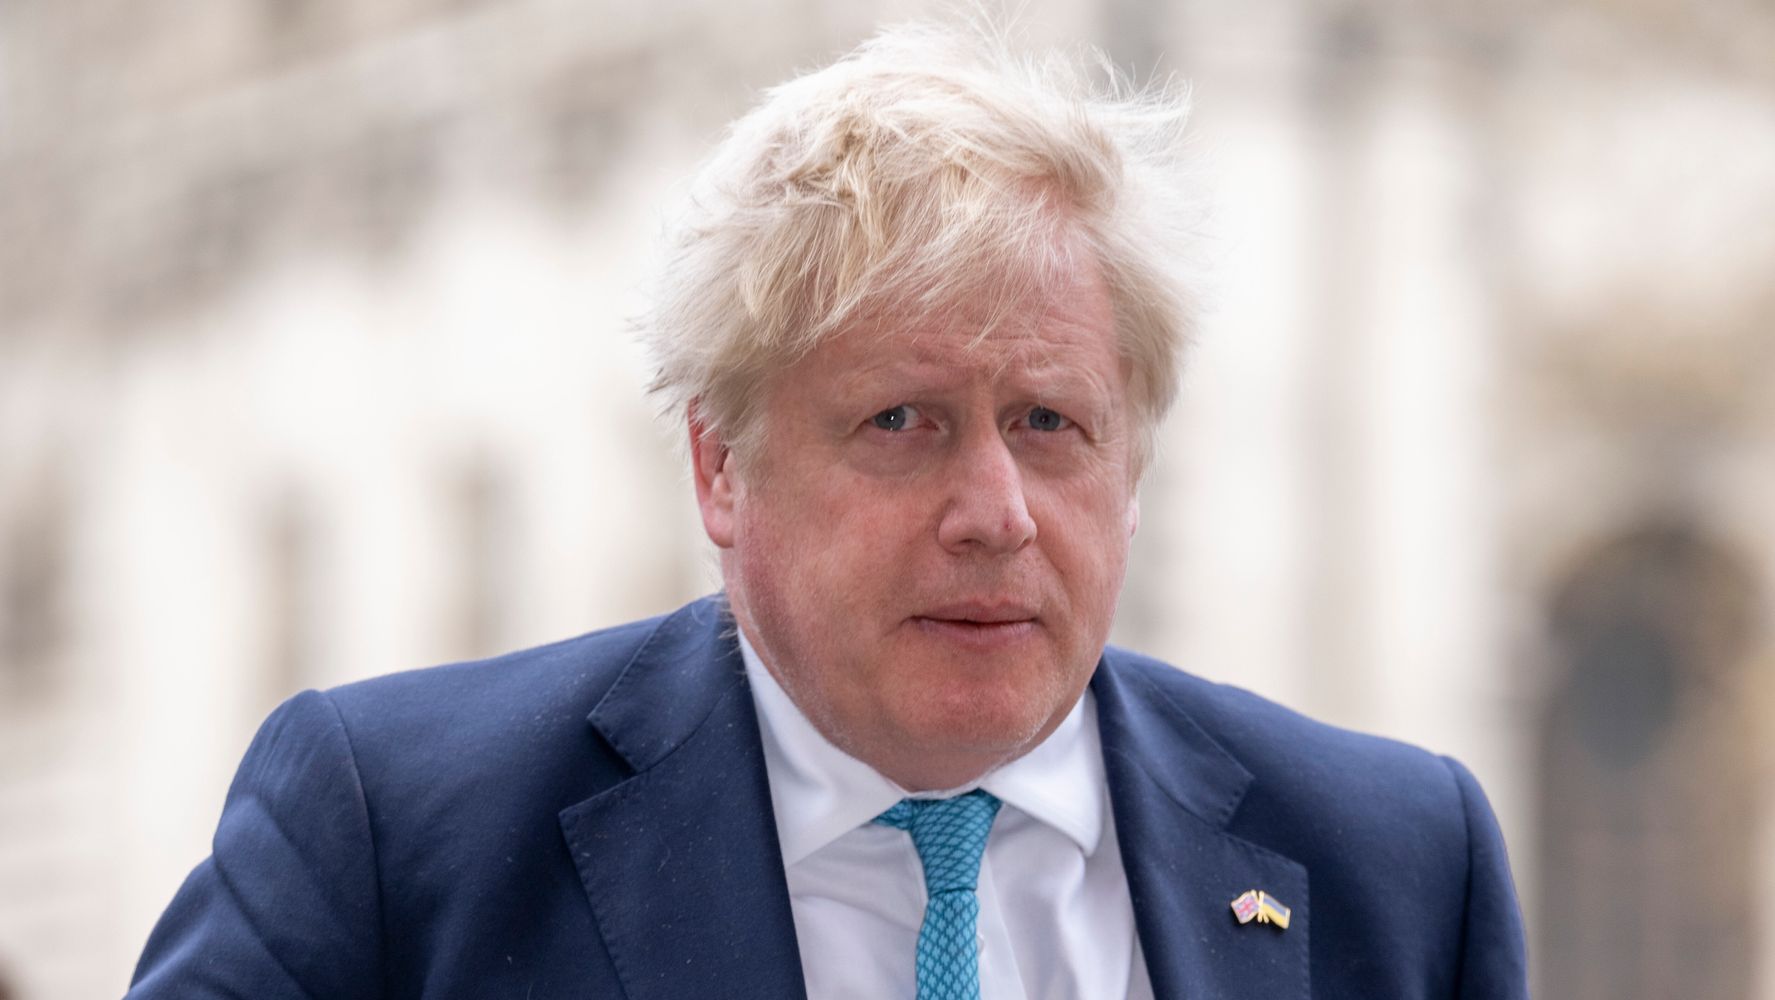 Boris Johnson Jokes About Trans People Hours Before UK's First Openly Trans MP Comes Out